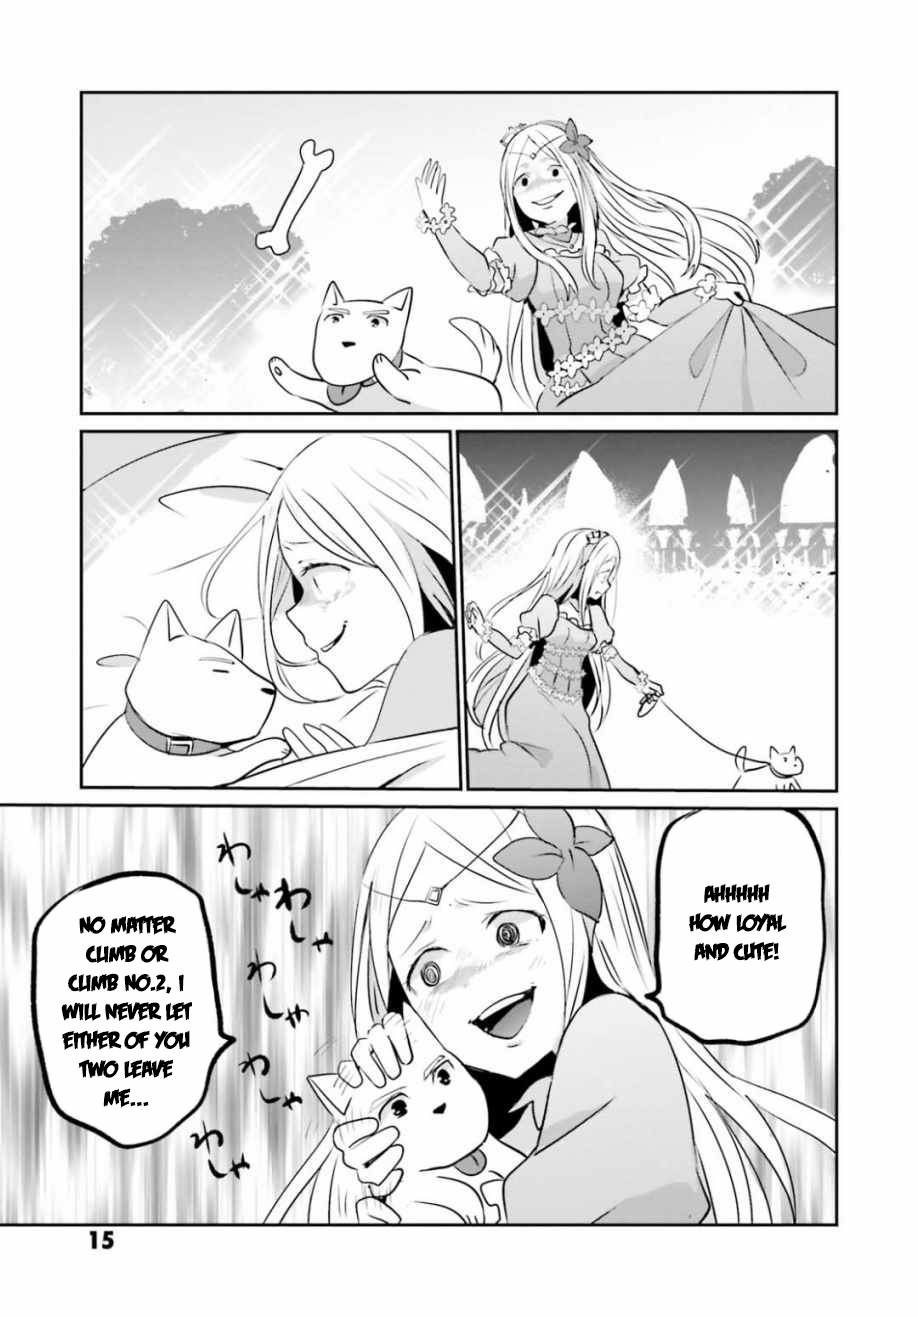 Overlord Official Comic A La Carte Vol. 4 Ch. 44 Princess Renner and the puppy